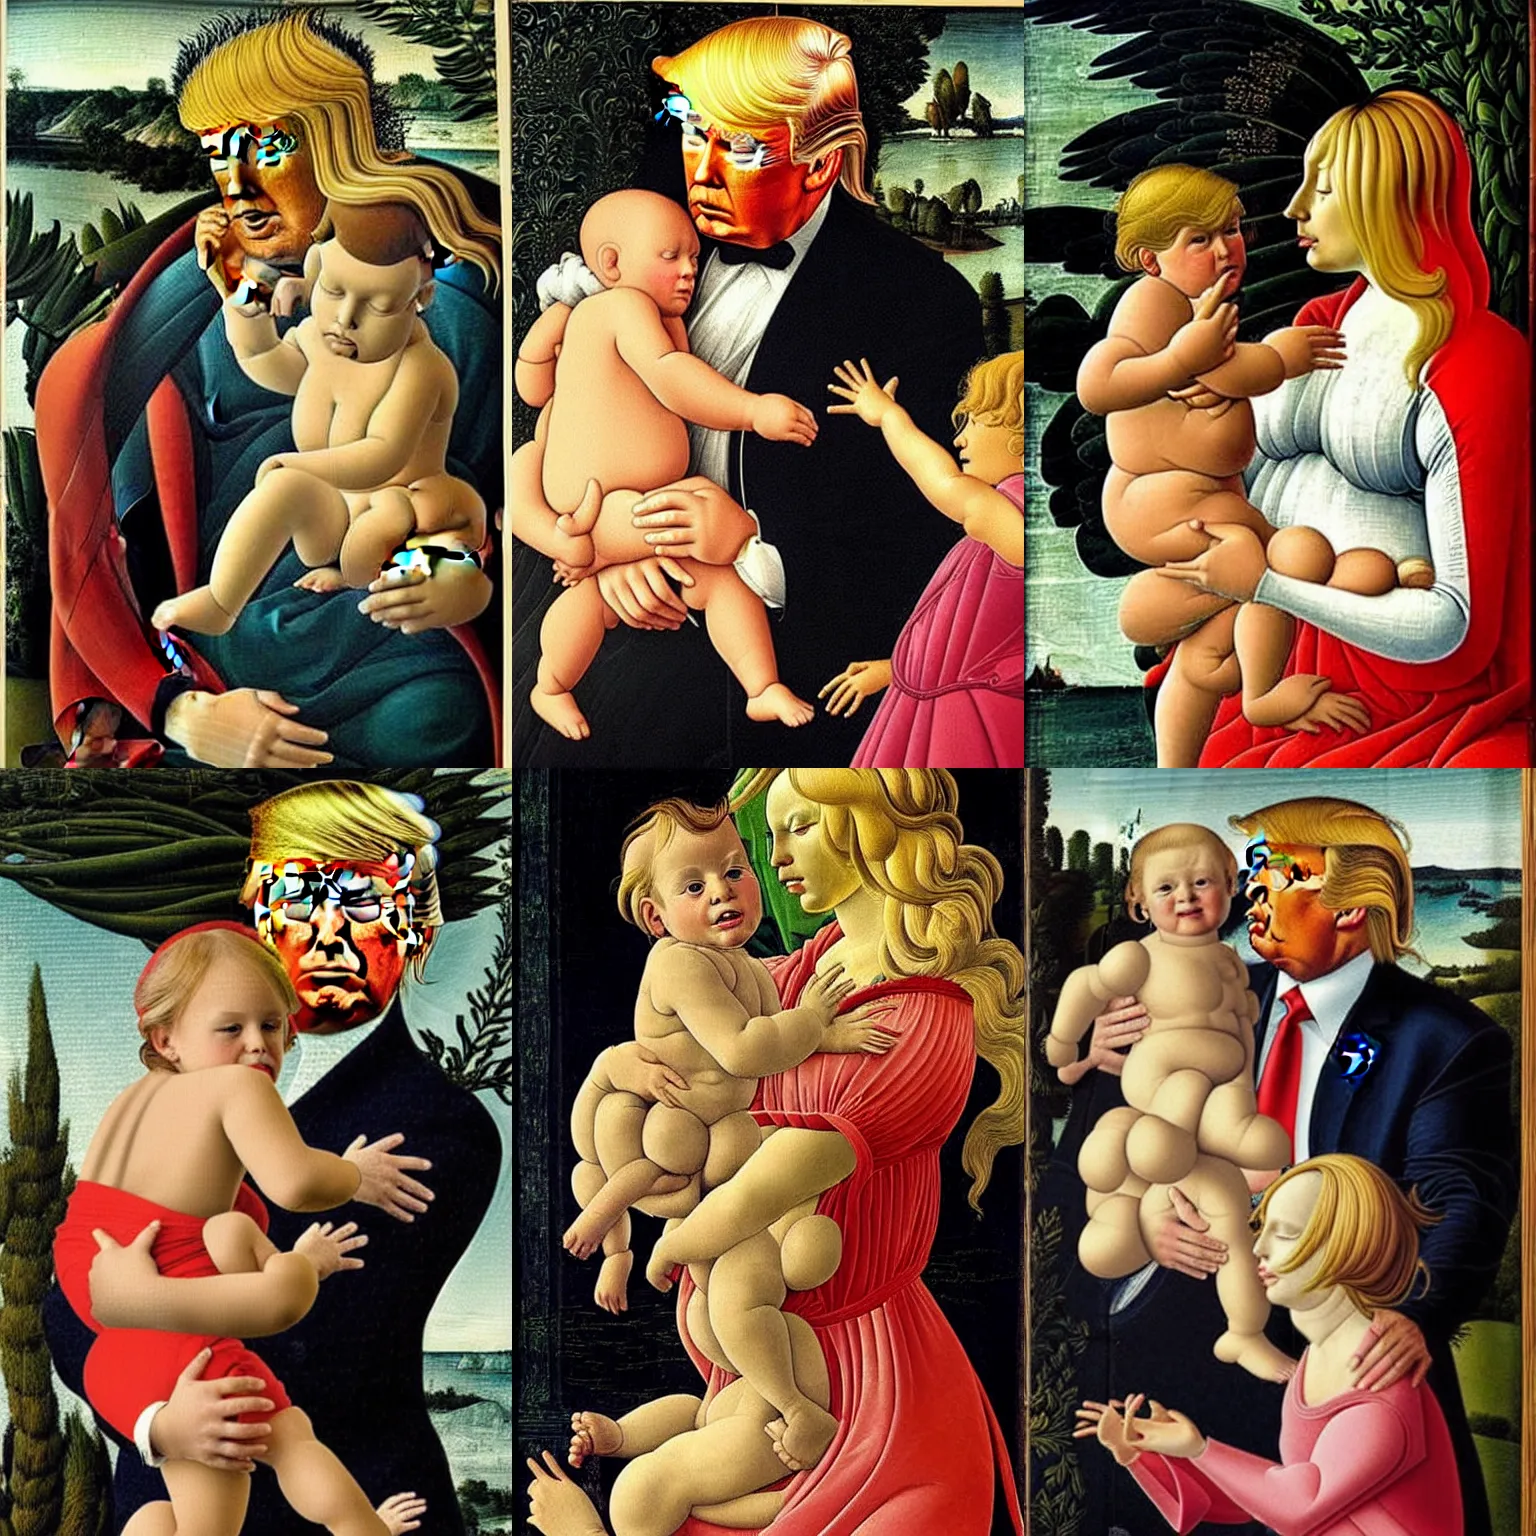 Prompt: Donald Trump and Child in the style of Sandro Botticelli